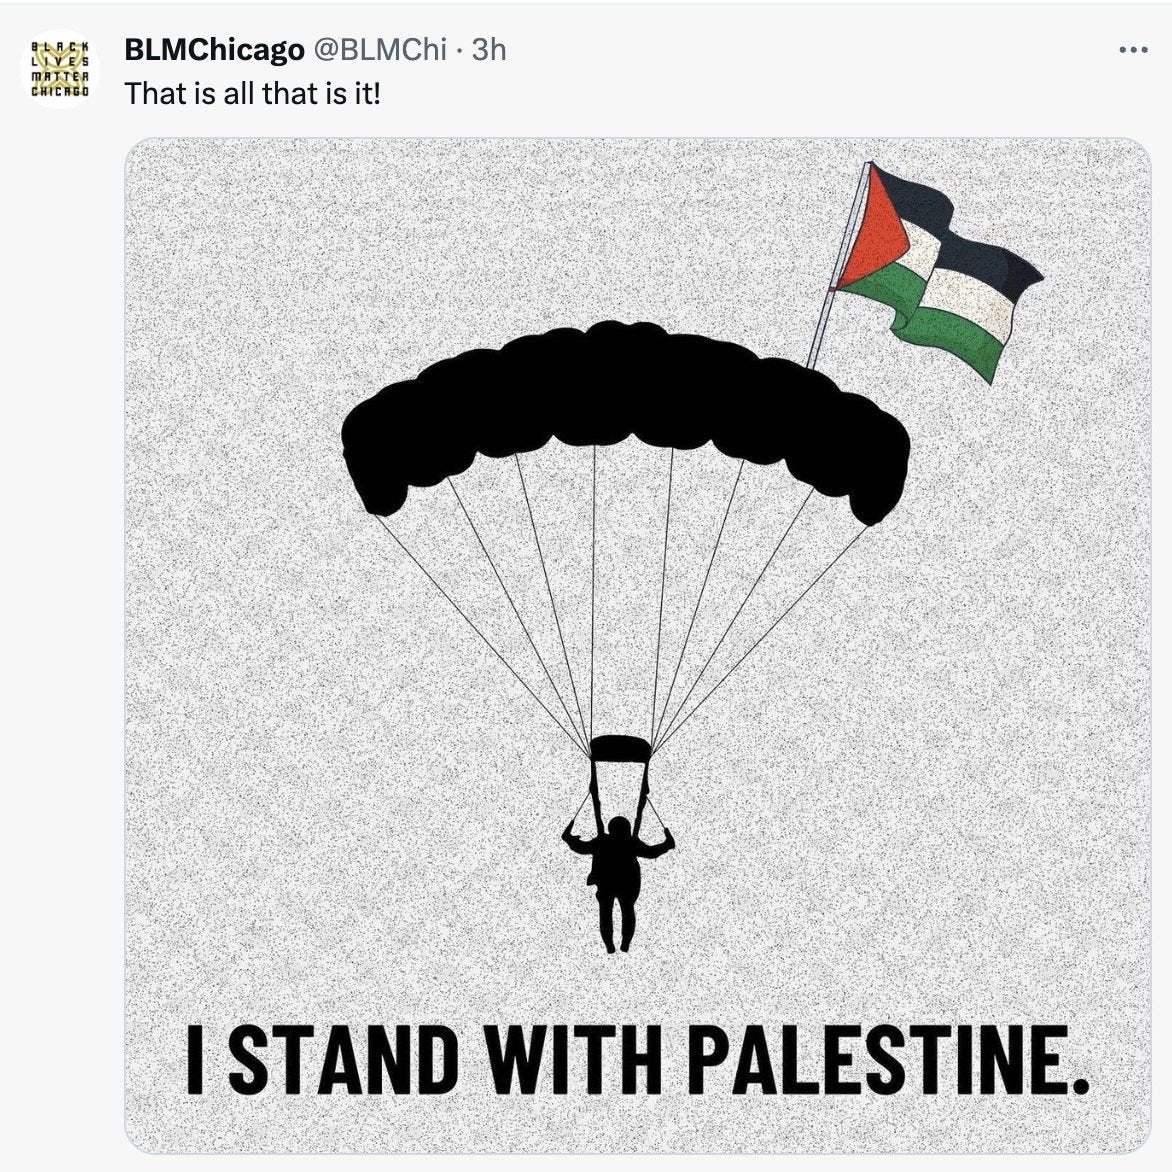 Last year, the BML division of the US city of Chicago shared glorifying pictures on Instagram of Hamas Islamist terrorists parachuting across the Israeli border and murdering innocent civilians in villages.